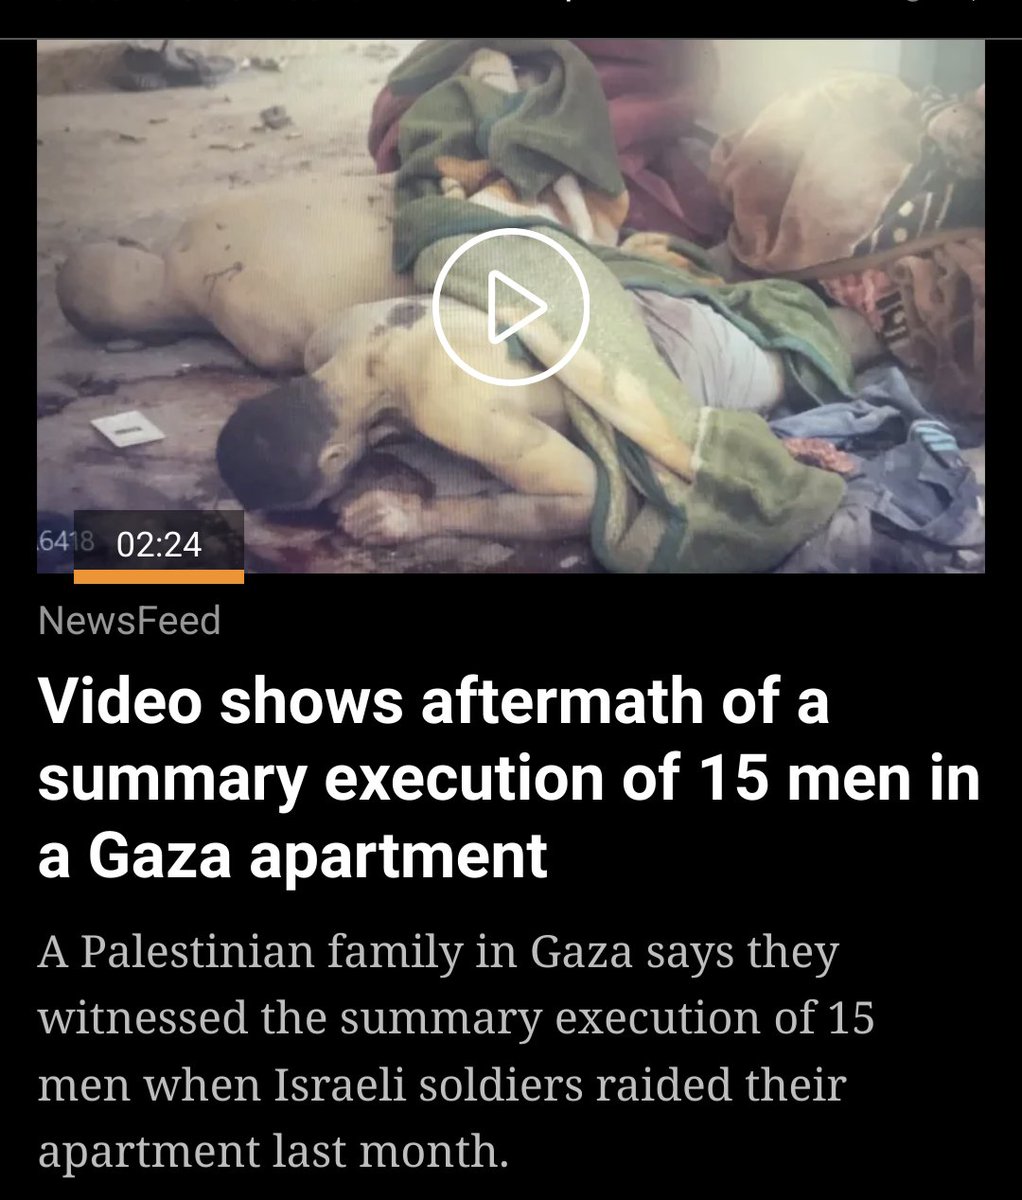 📰In summary: Al Jazeera uncovers evidence of 15 civilian Palestinians' summary executions, revealing bullet entry wounds in the backs of civilians. #HumanRights #Palestine